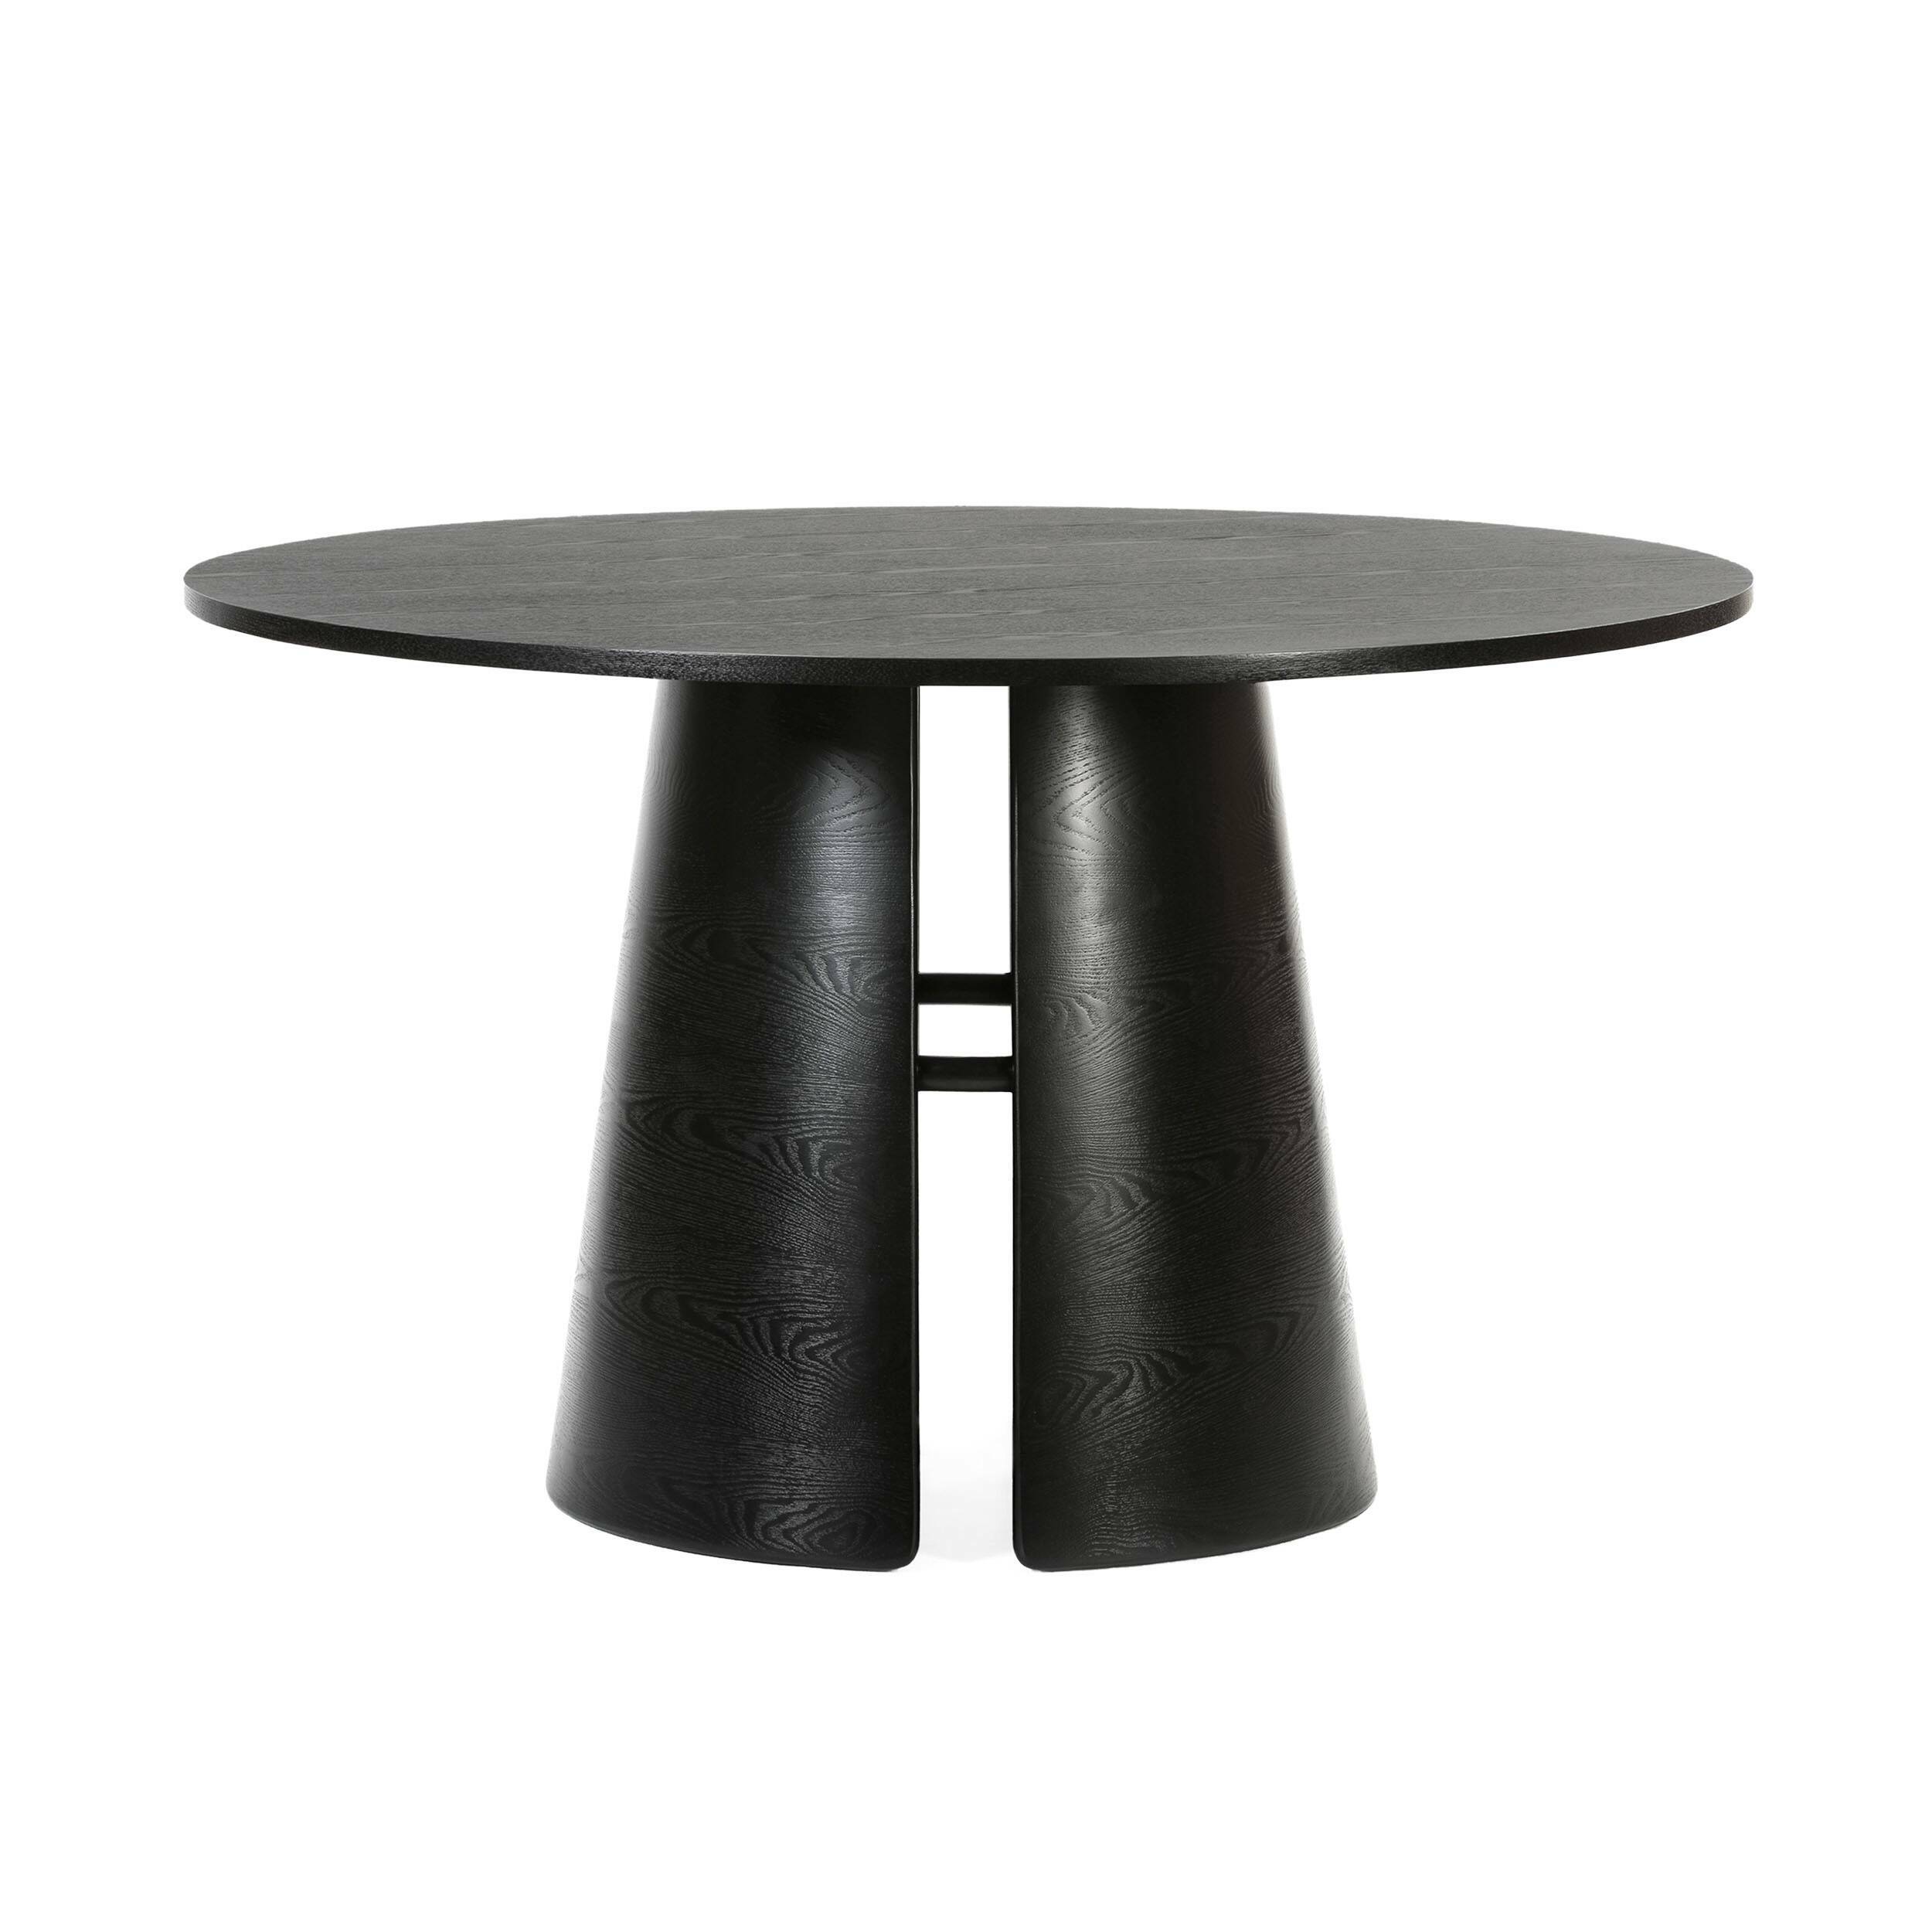 Teulat cep Dining Table